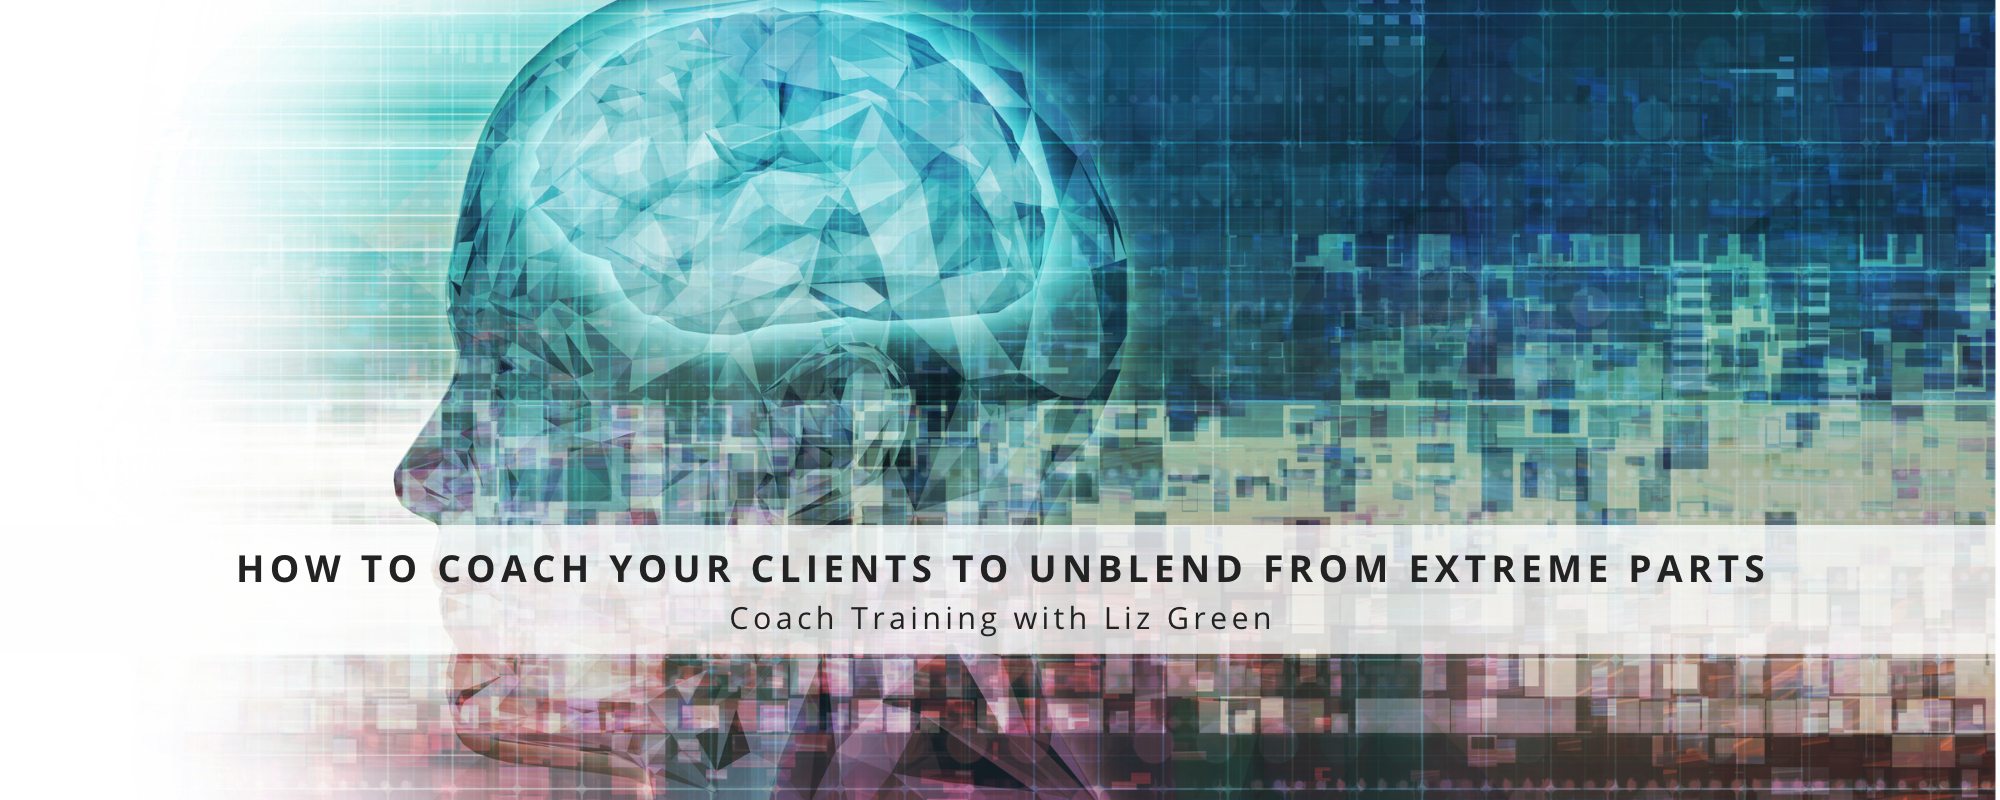 How to Coach Your Clients to Unblend from Extreme Parts with Liz Green